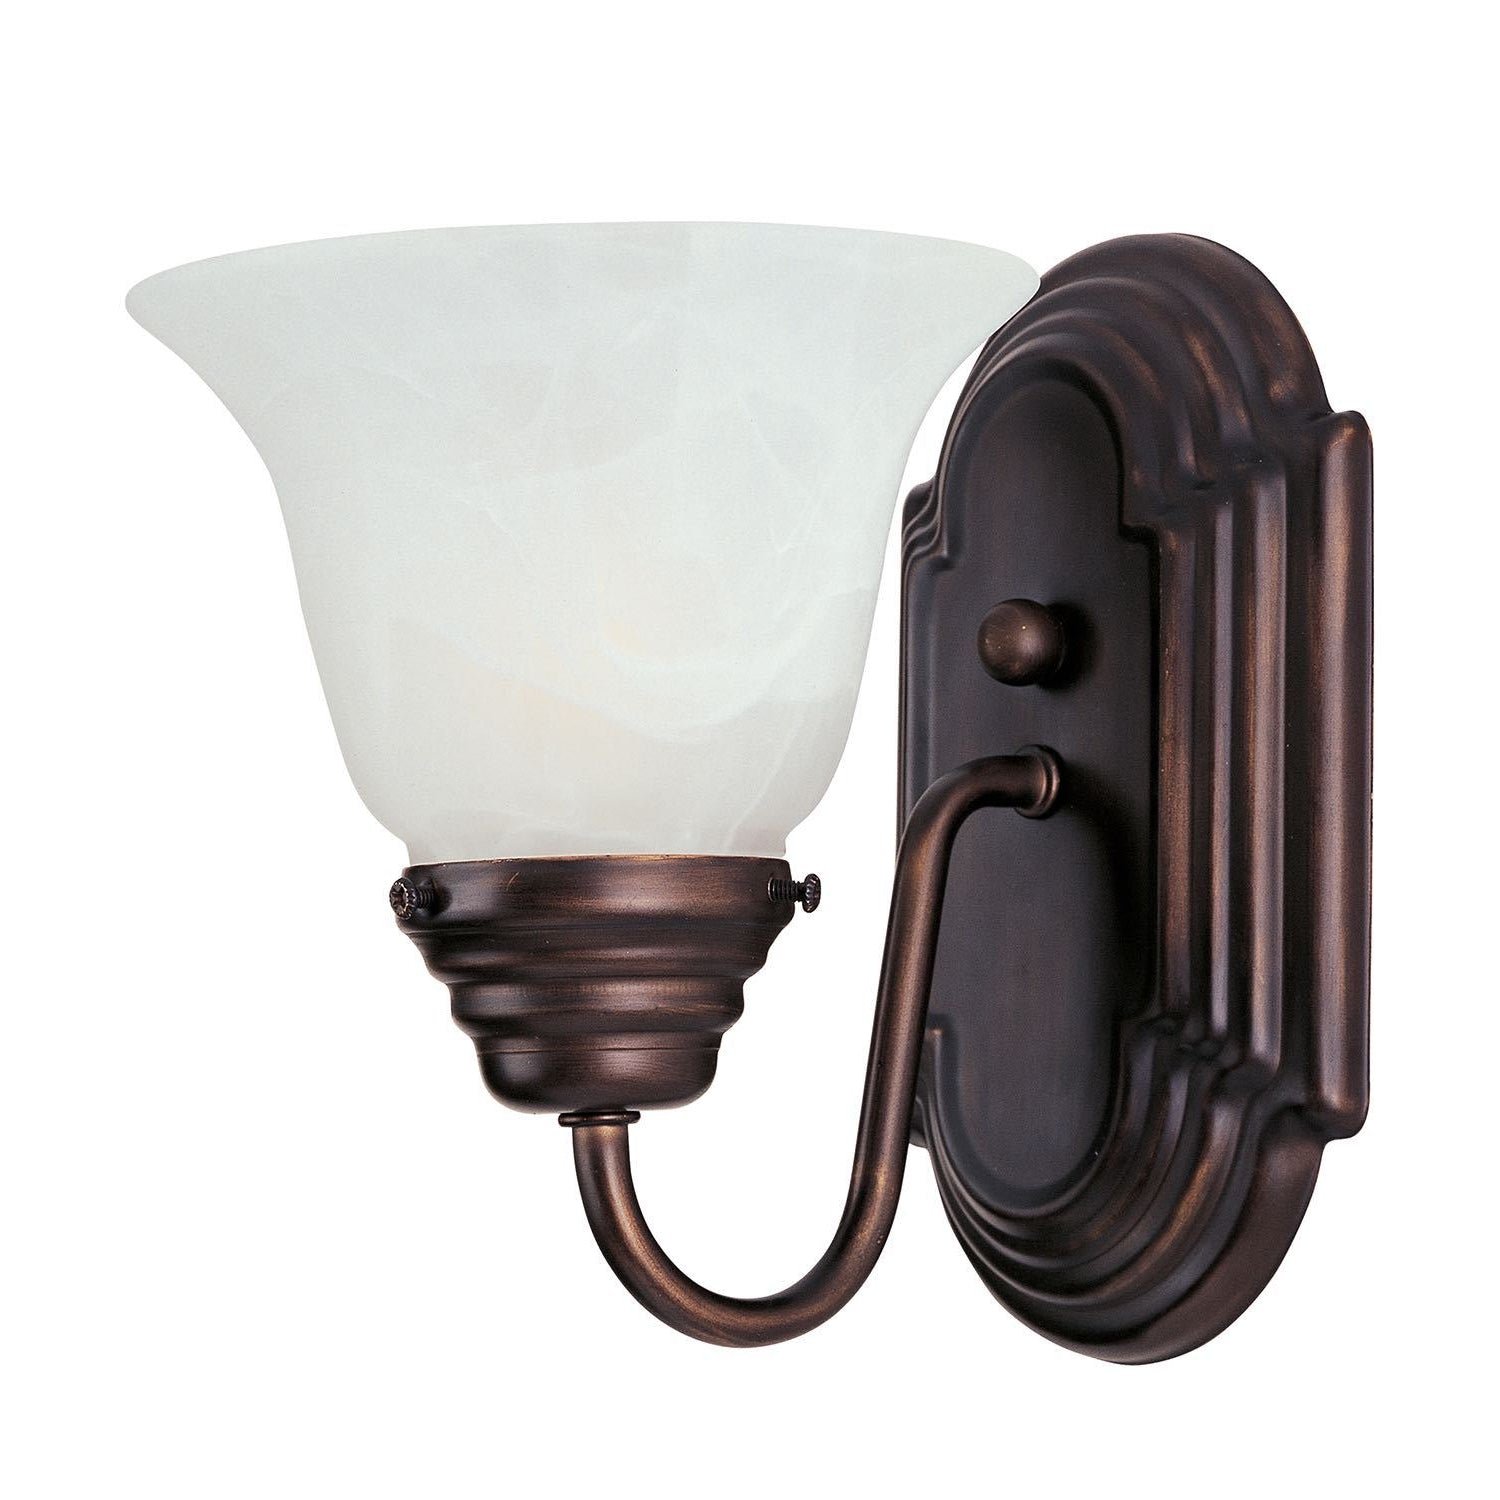 Essentials - 801x Sconce Oil Rubbed Bronze | Marble